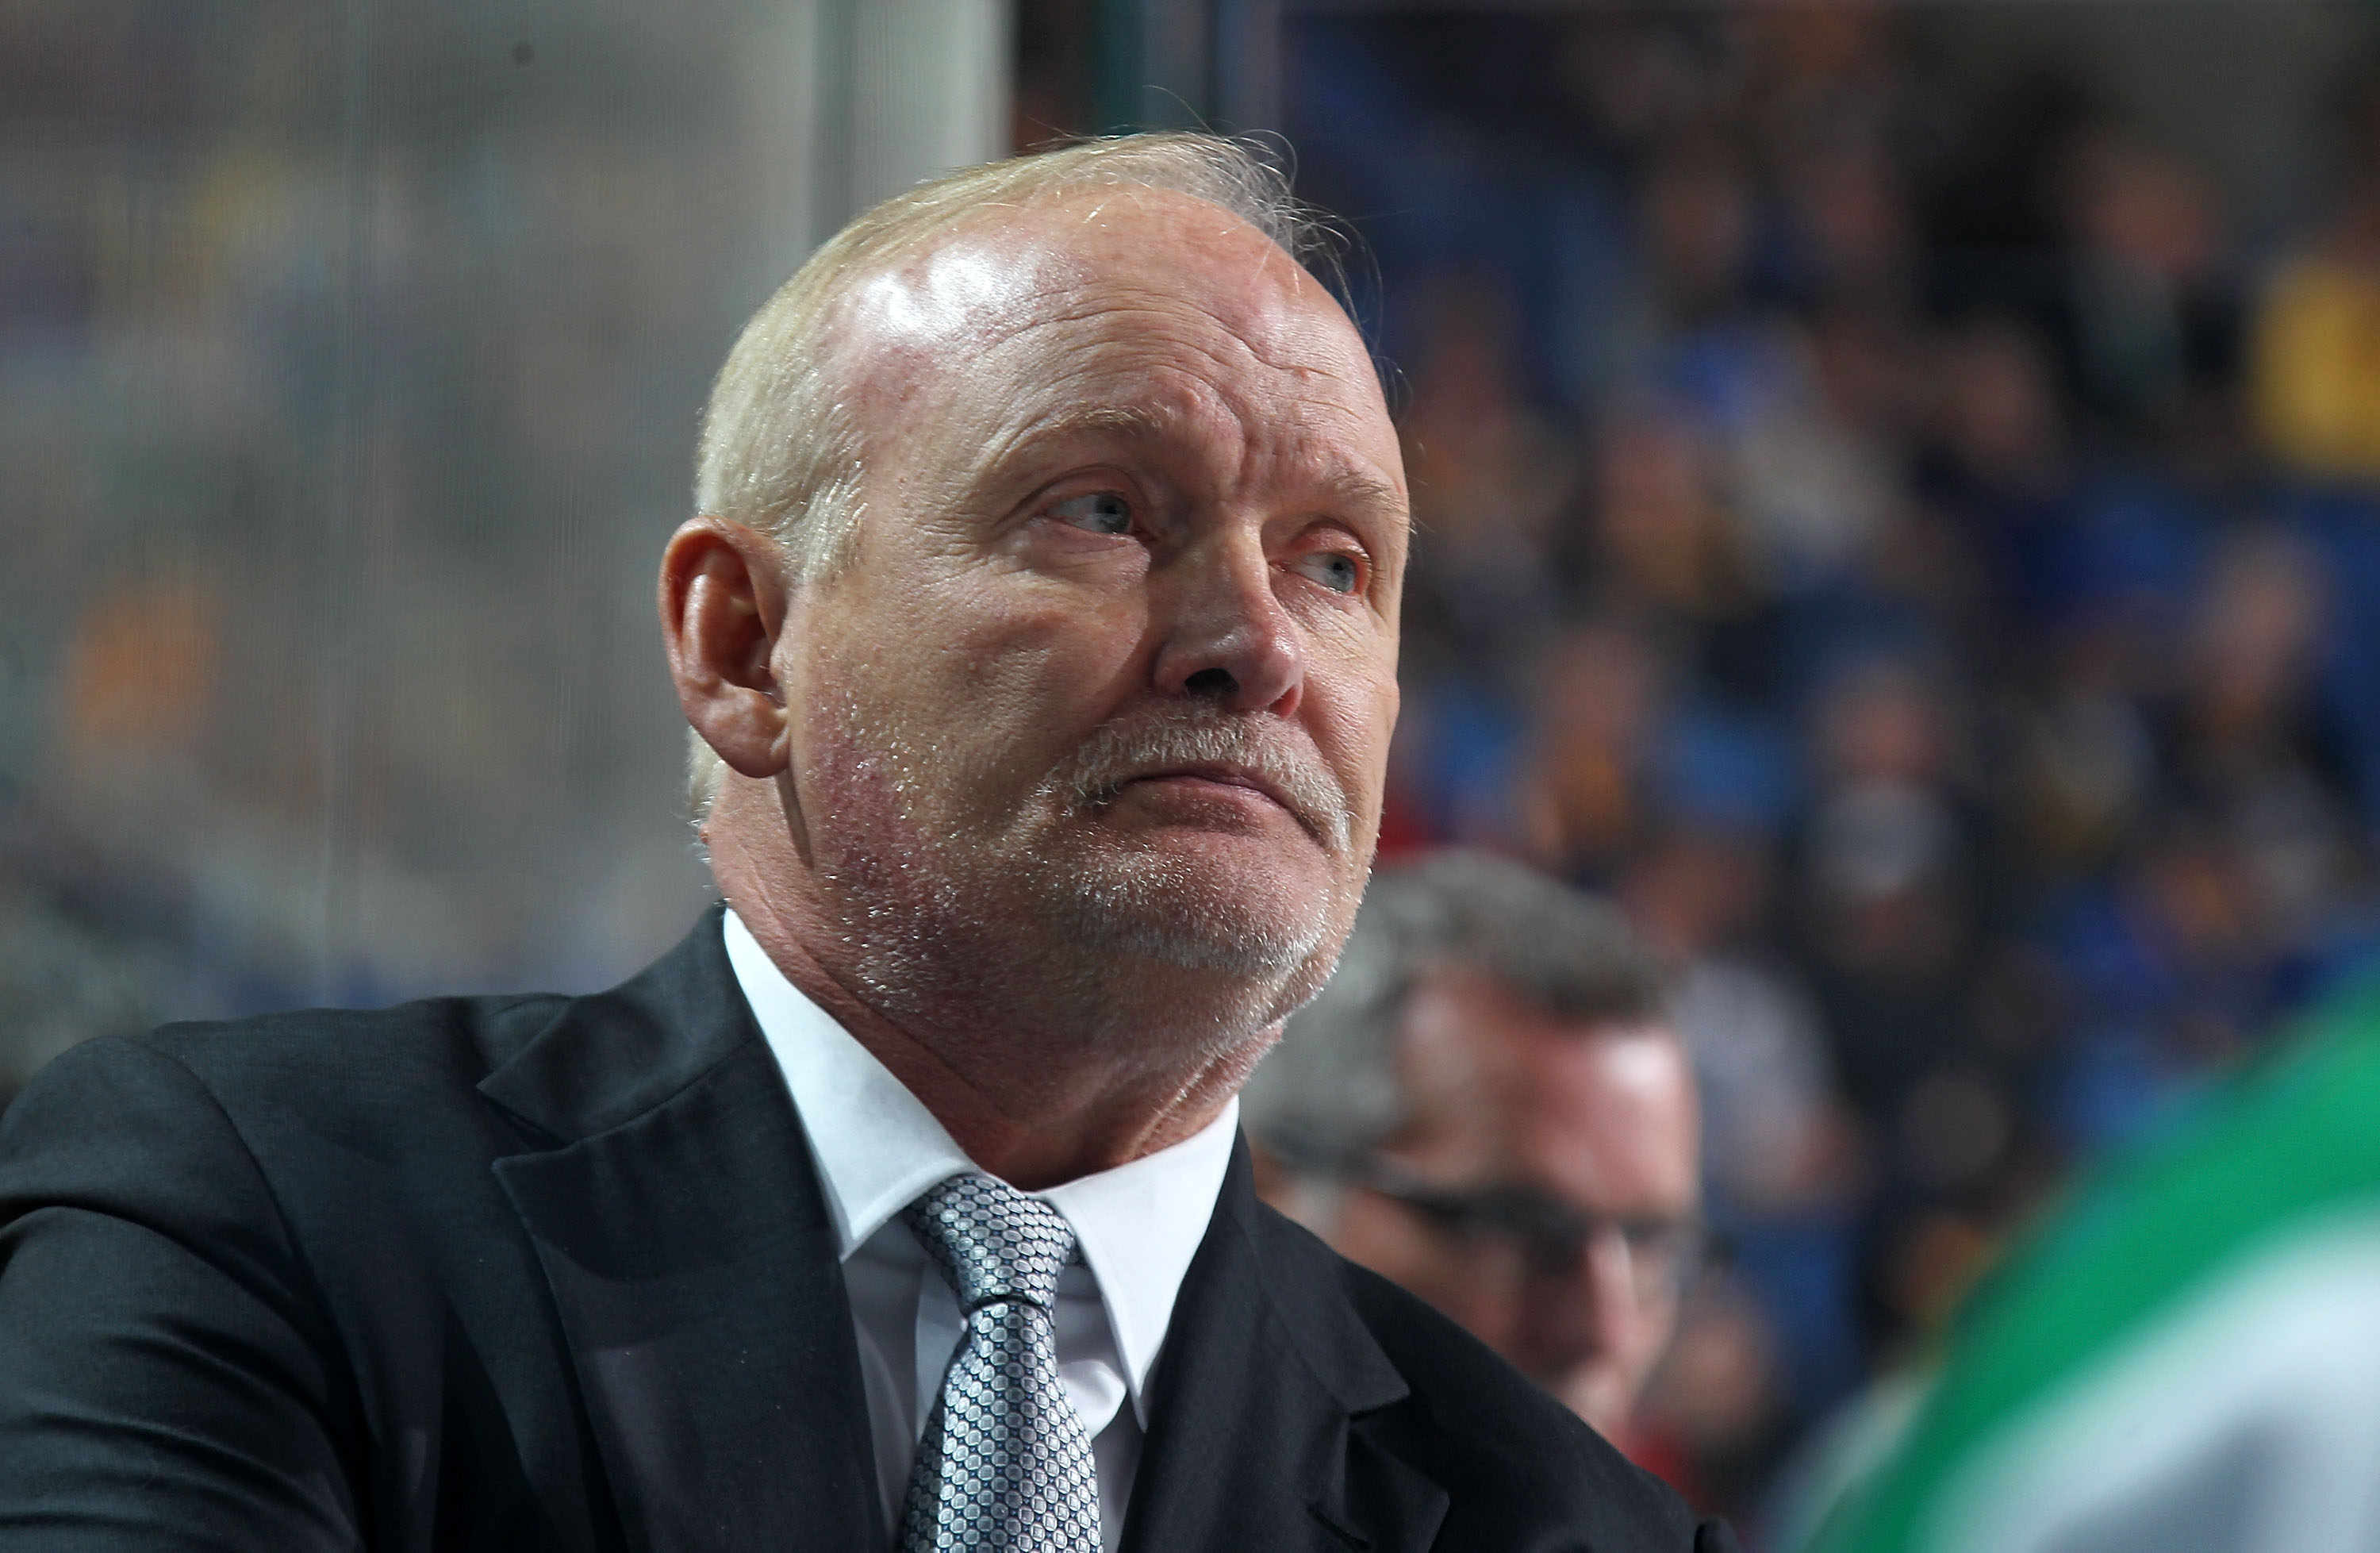 BUFFALO, NY - NOVEMBER 17: Head coach Lindy Ruff of the Dallas Stars watches the action against the Buffalo Sabres during an NHL game on November 17, 2015 at the First Niagara Center in Buffalo, New York. (Photo by Bill Wippert/NHLI via Getty Images)